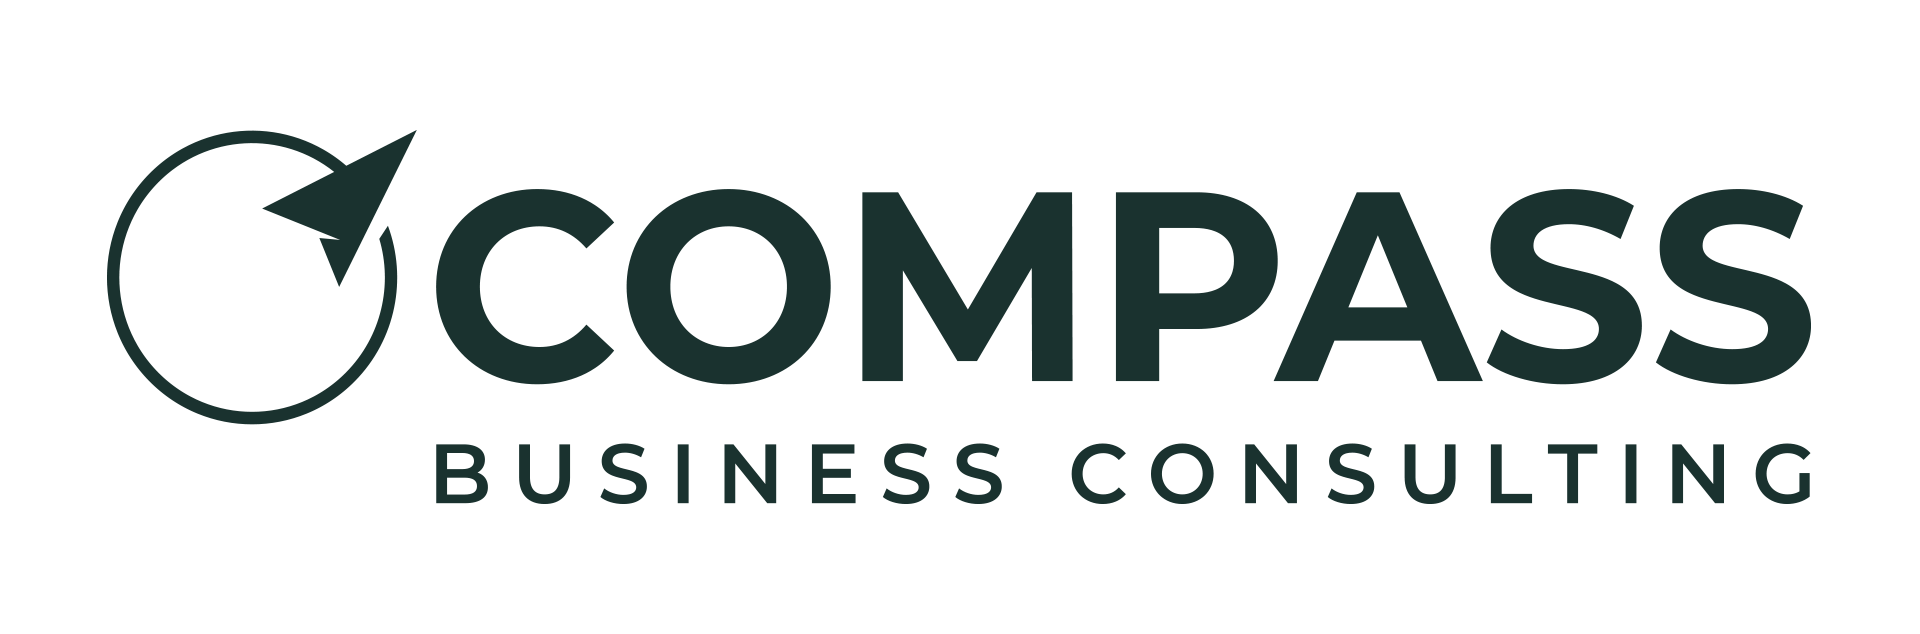 Compass Business Consulting